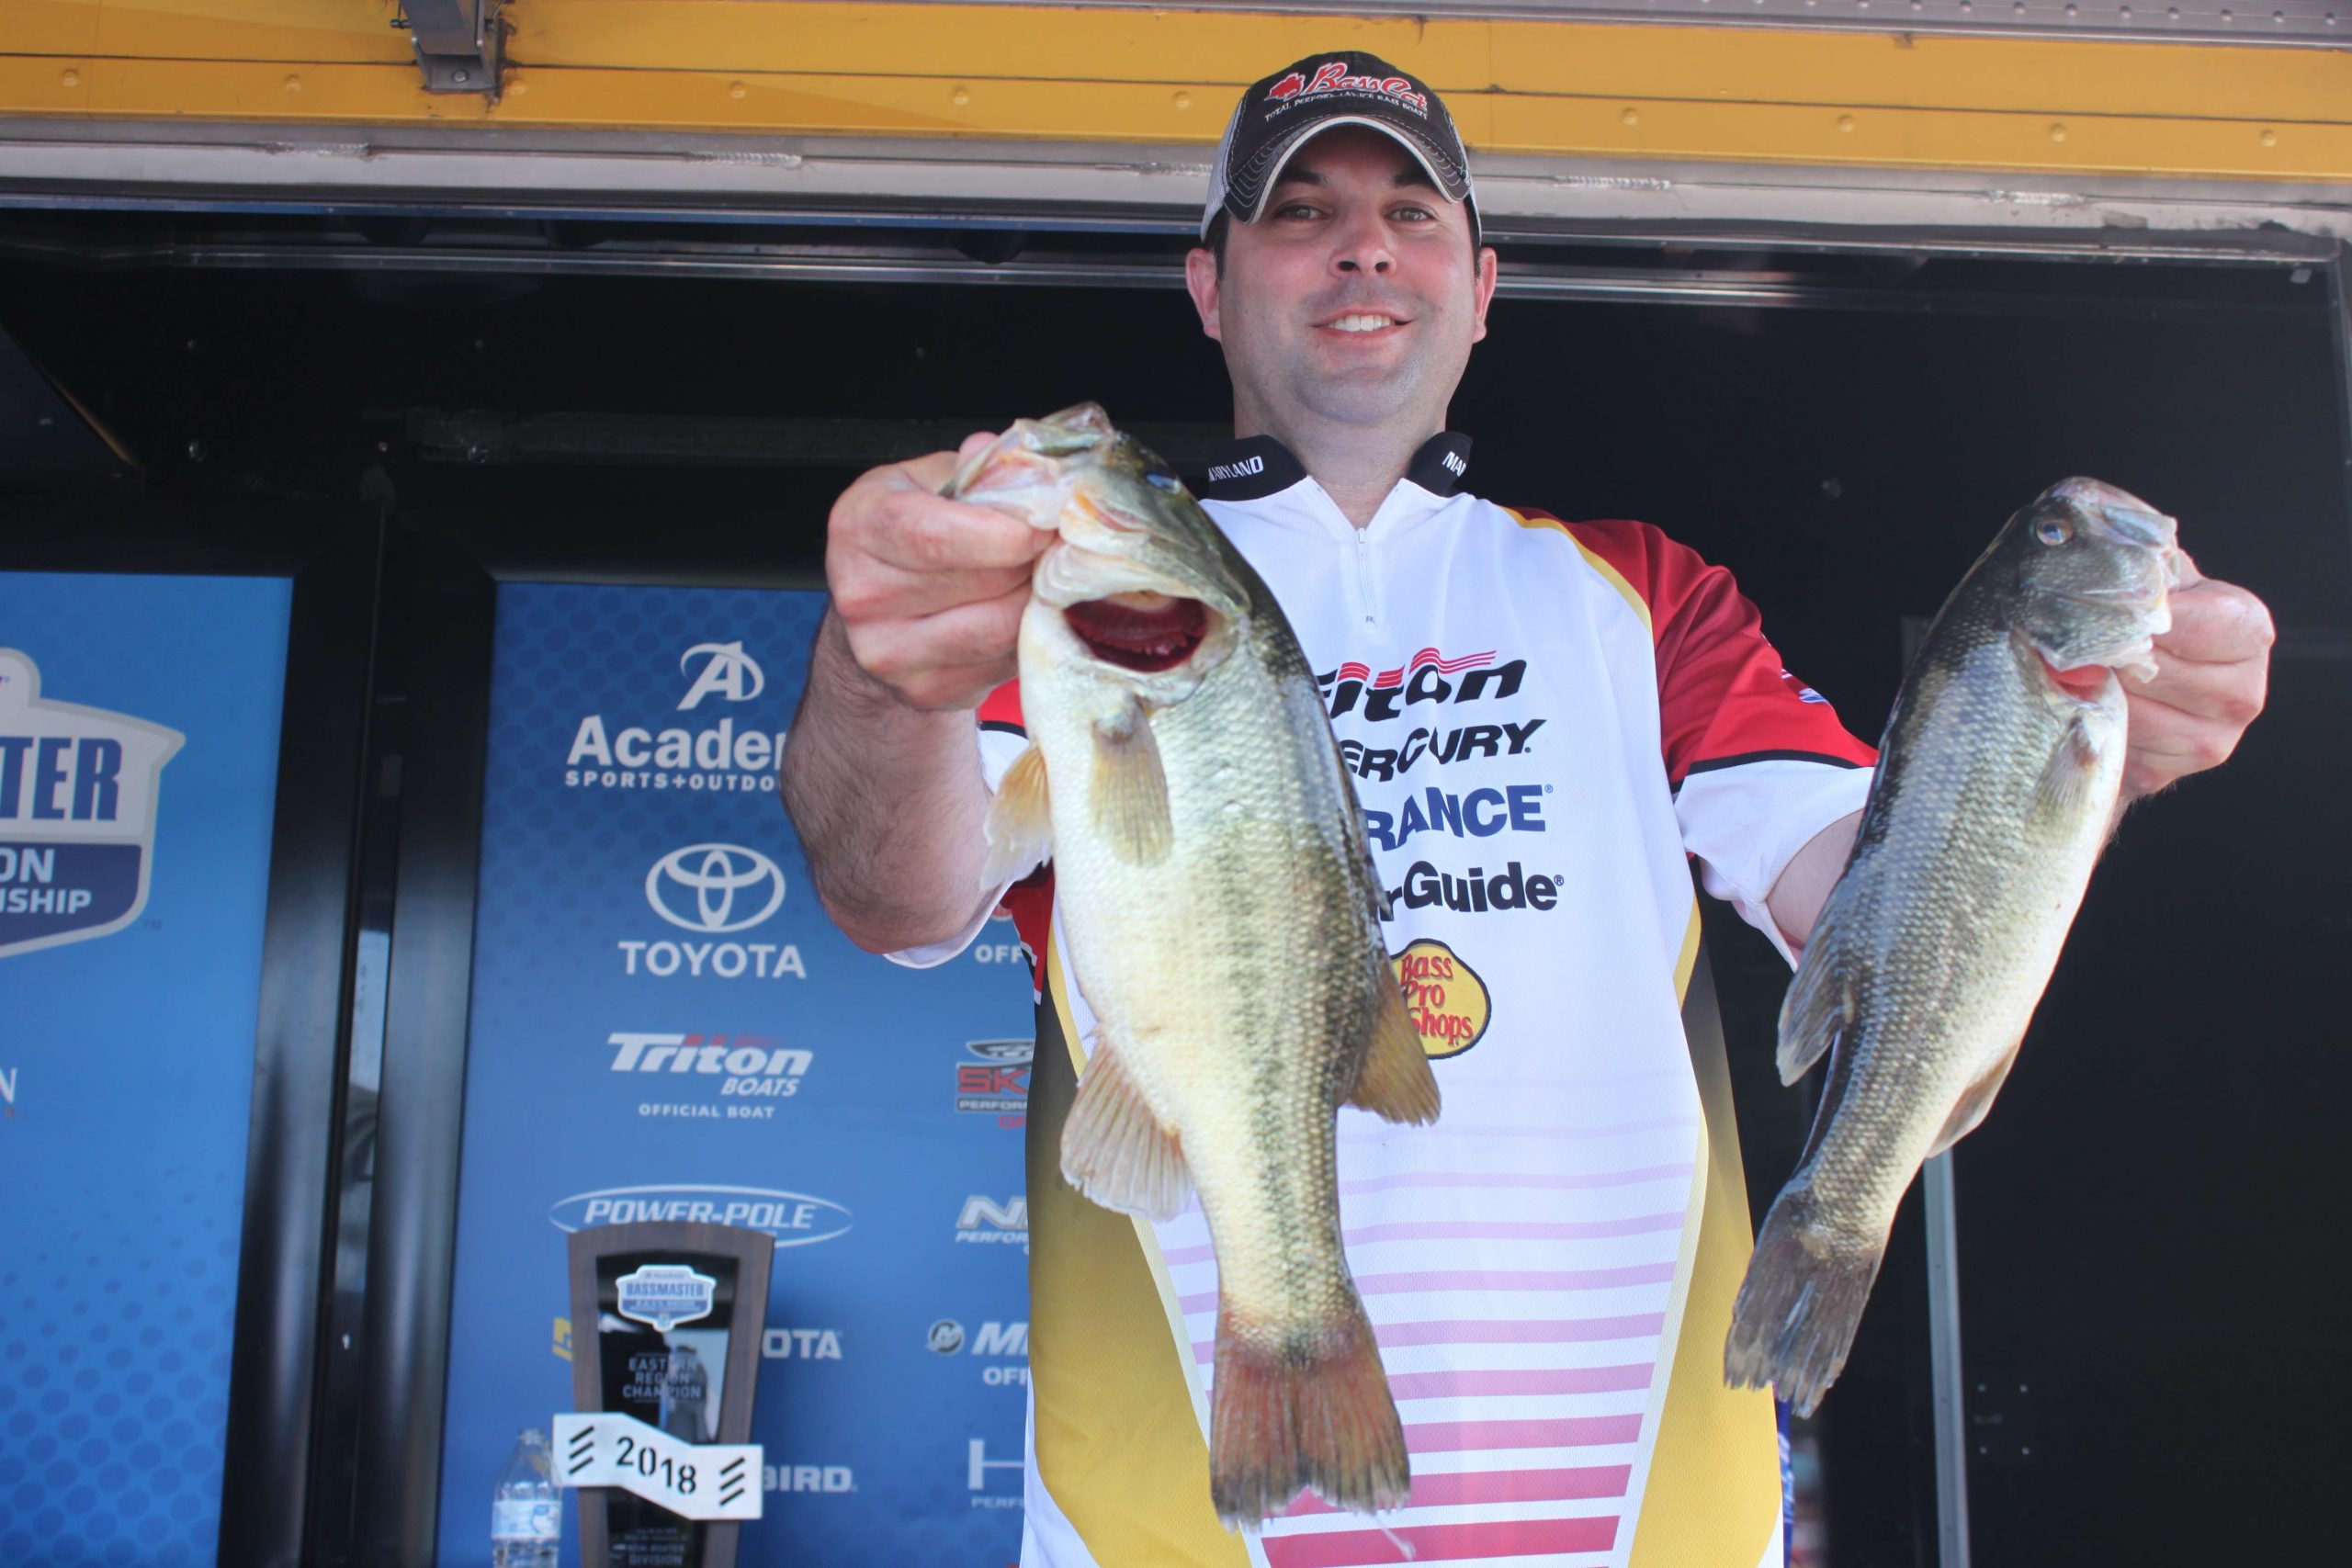 Thereâs Paul Gietka of Maryland who finished fifth in the boater division with a three-day total of 26 pounds, 13 ounces. Boaters could weigh five bass per day, and non-boaters could weigh three bass.